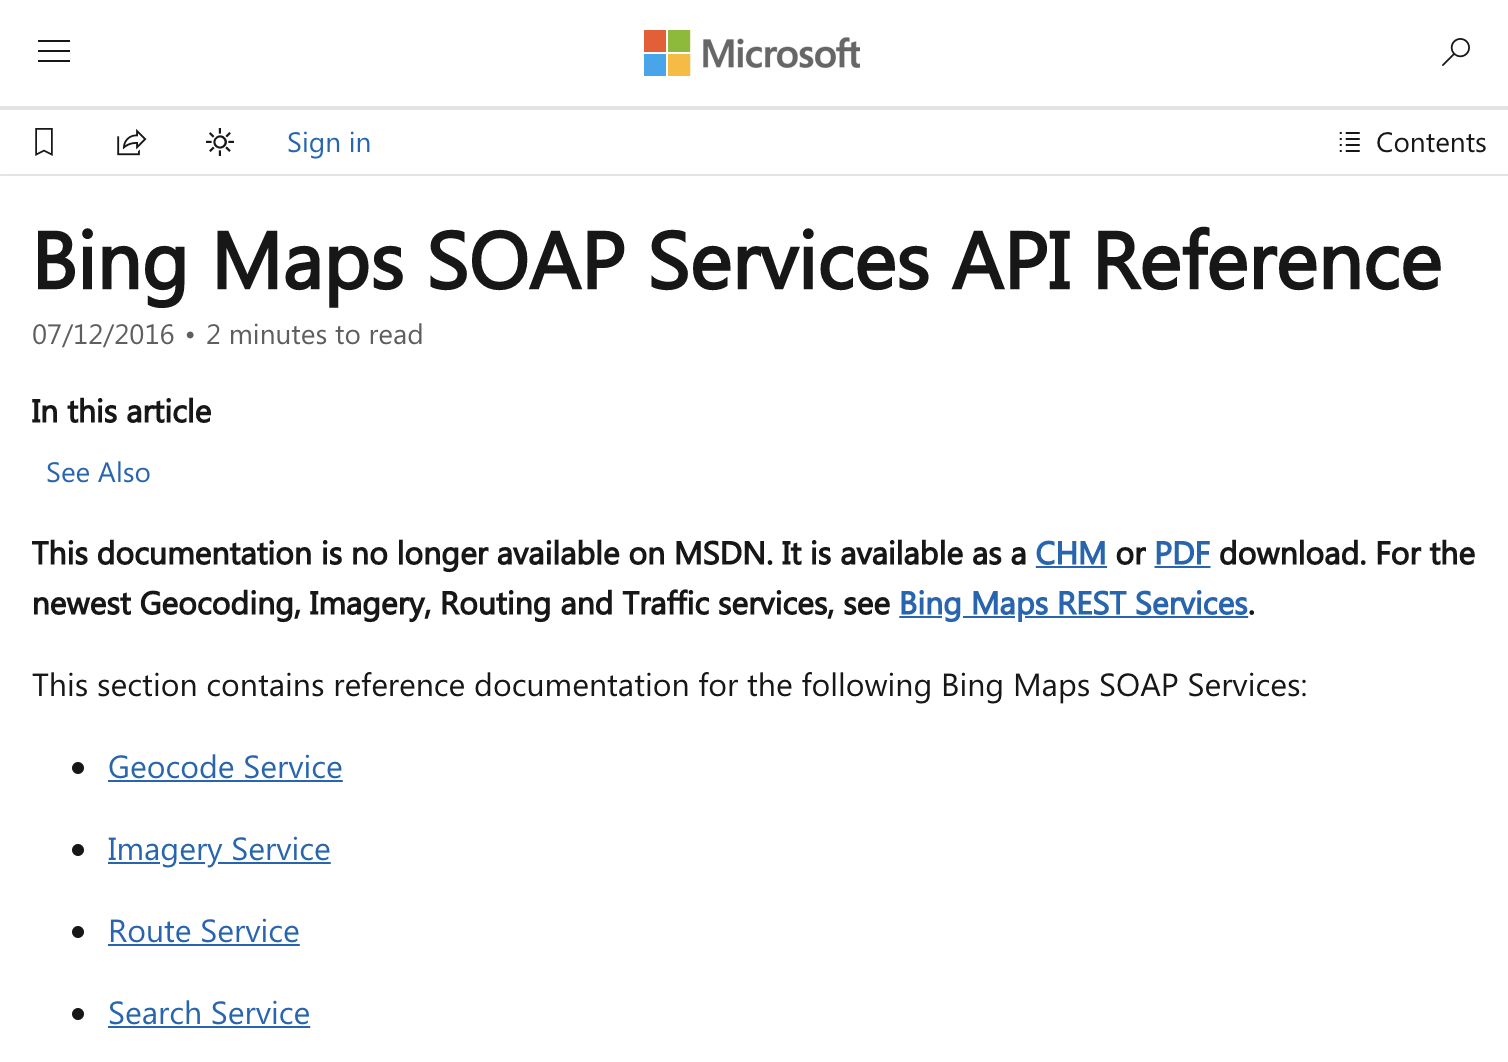 Bing Maps SOAP Web Services API Reference (2016)